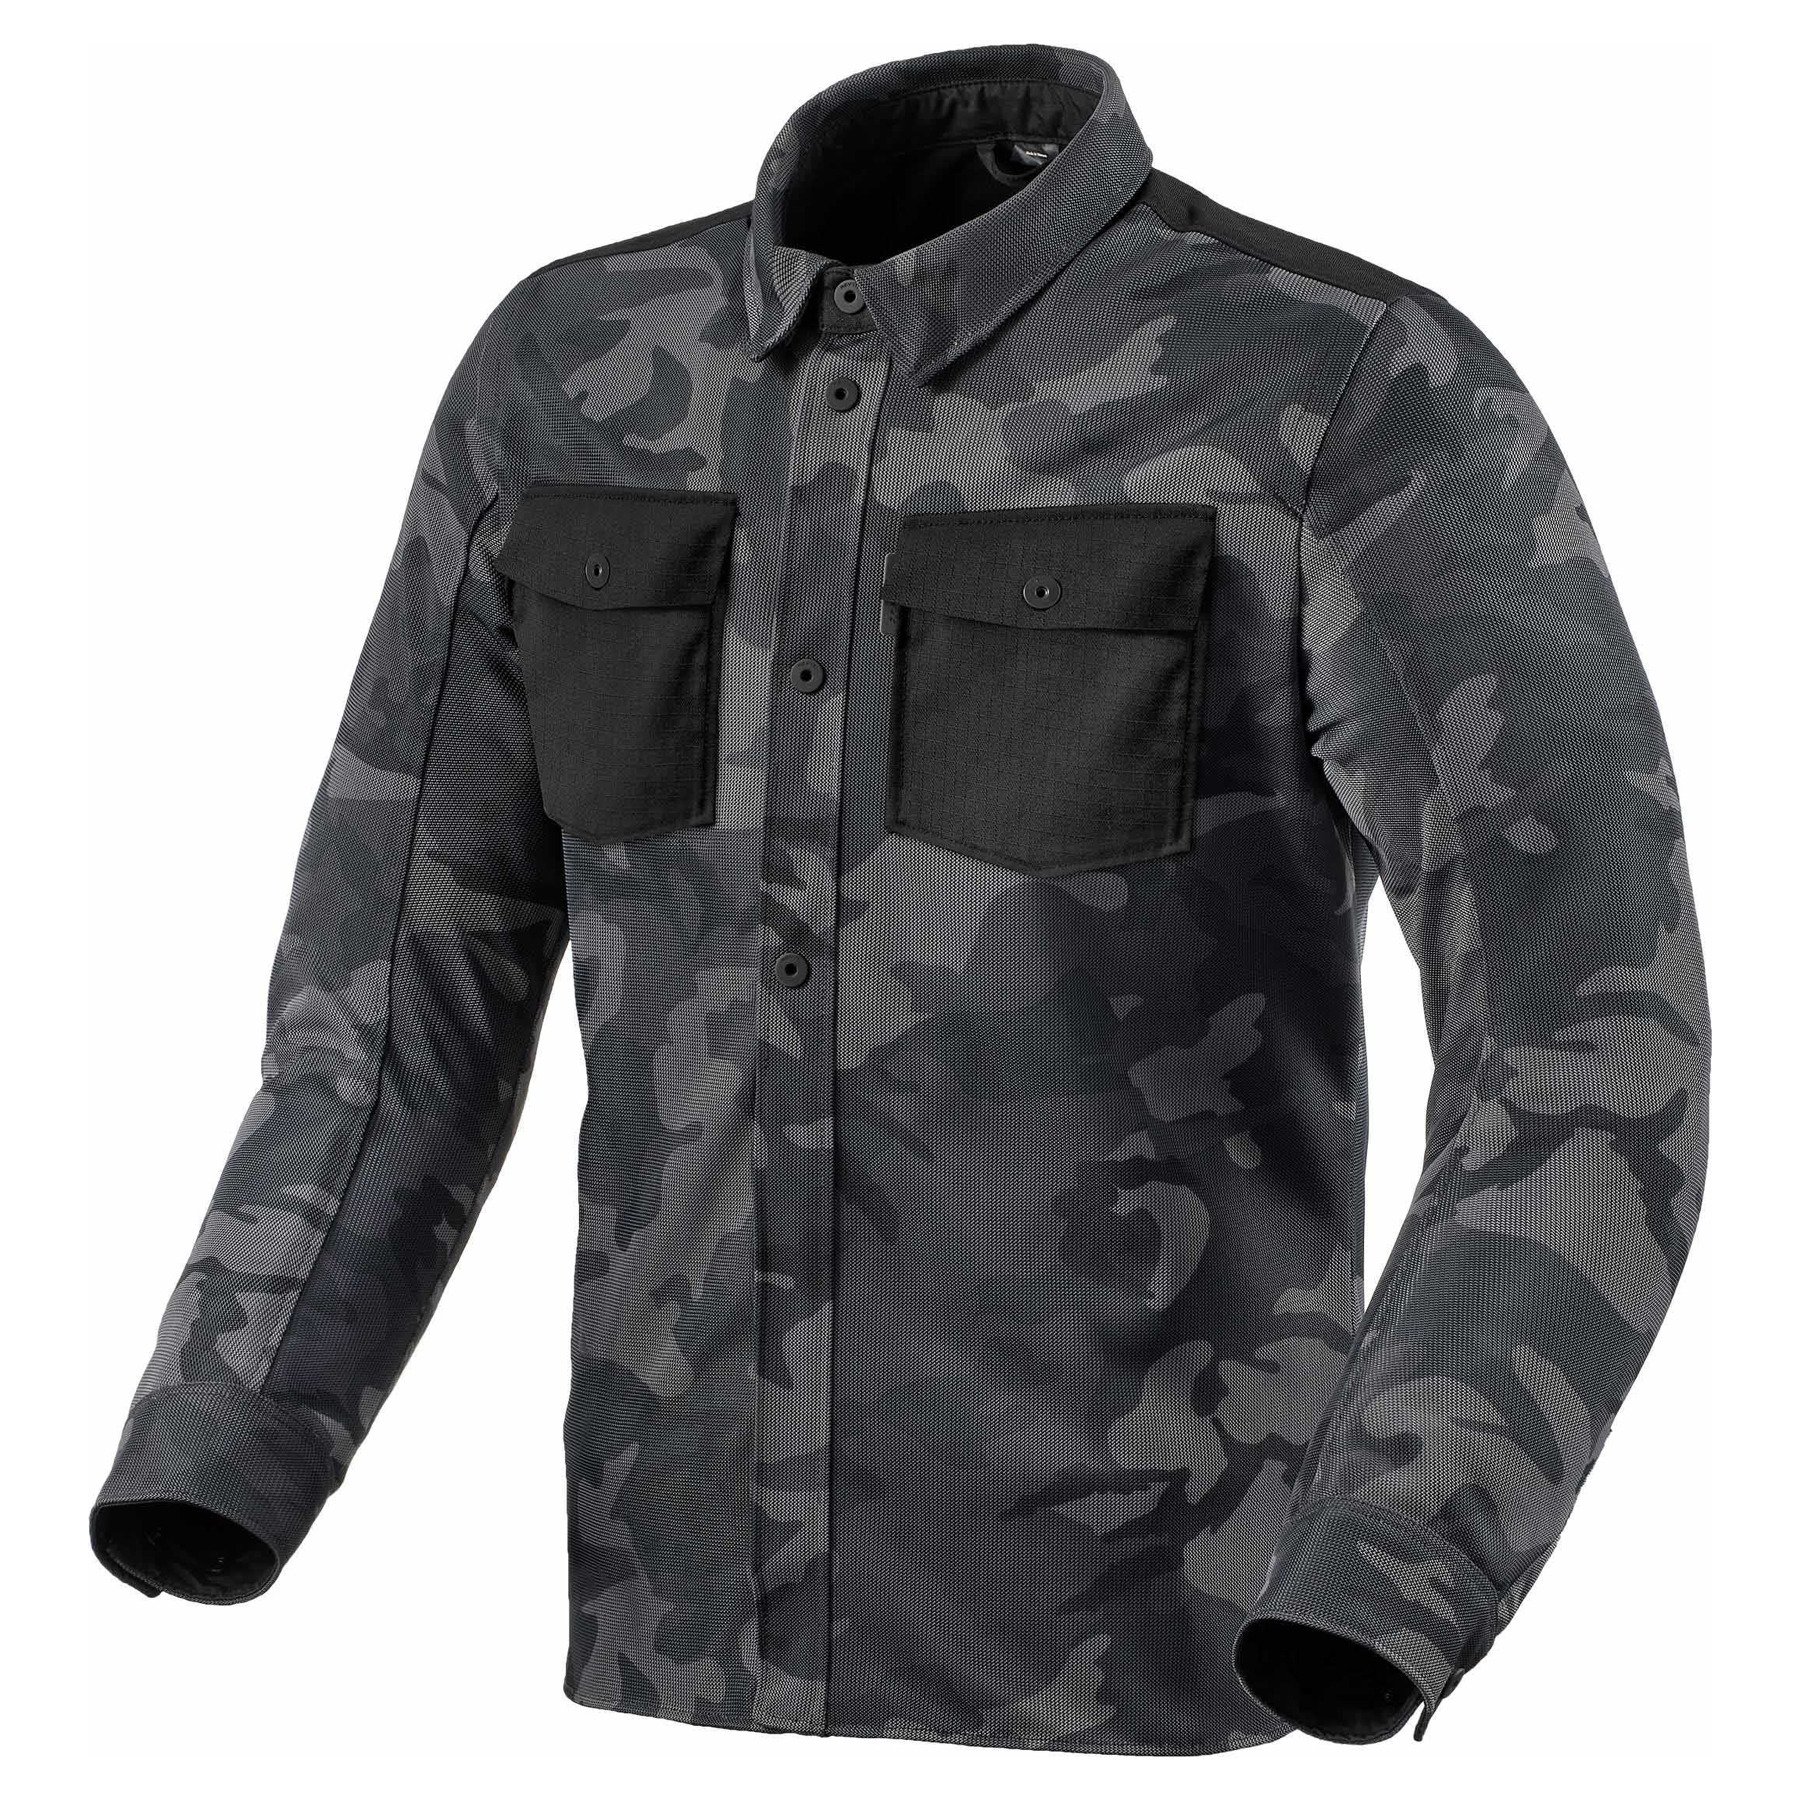 Image of REV'IT! Overshirt Tracer Air 2 Jacket Camo Dark Gray Size L ID 8700001317160